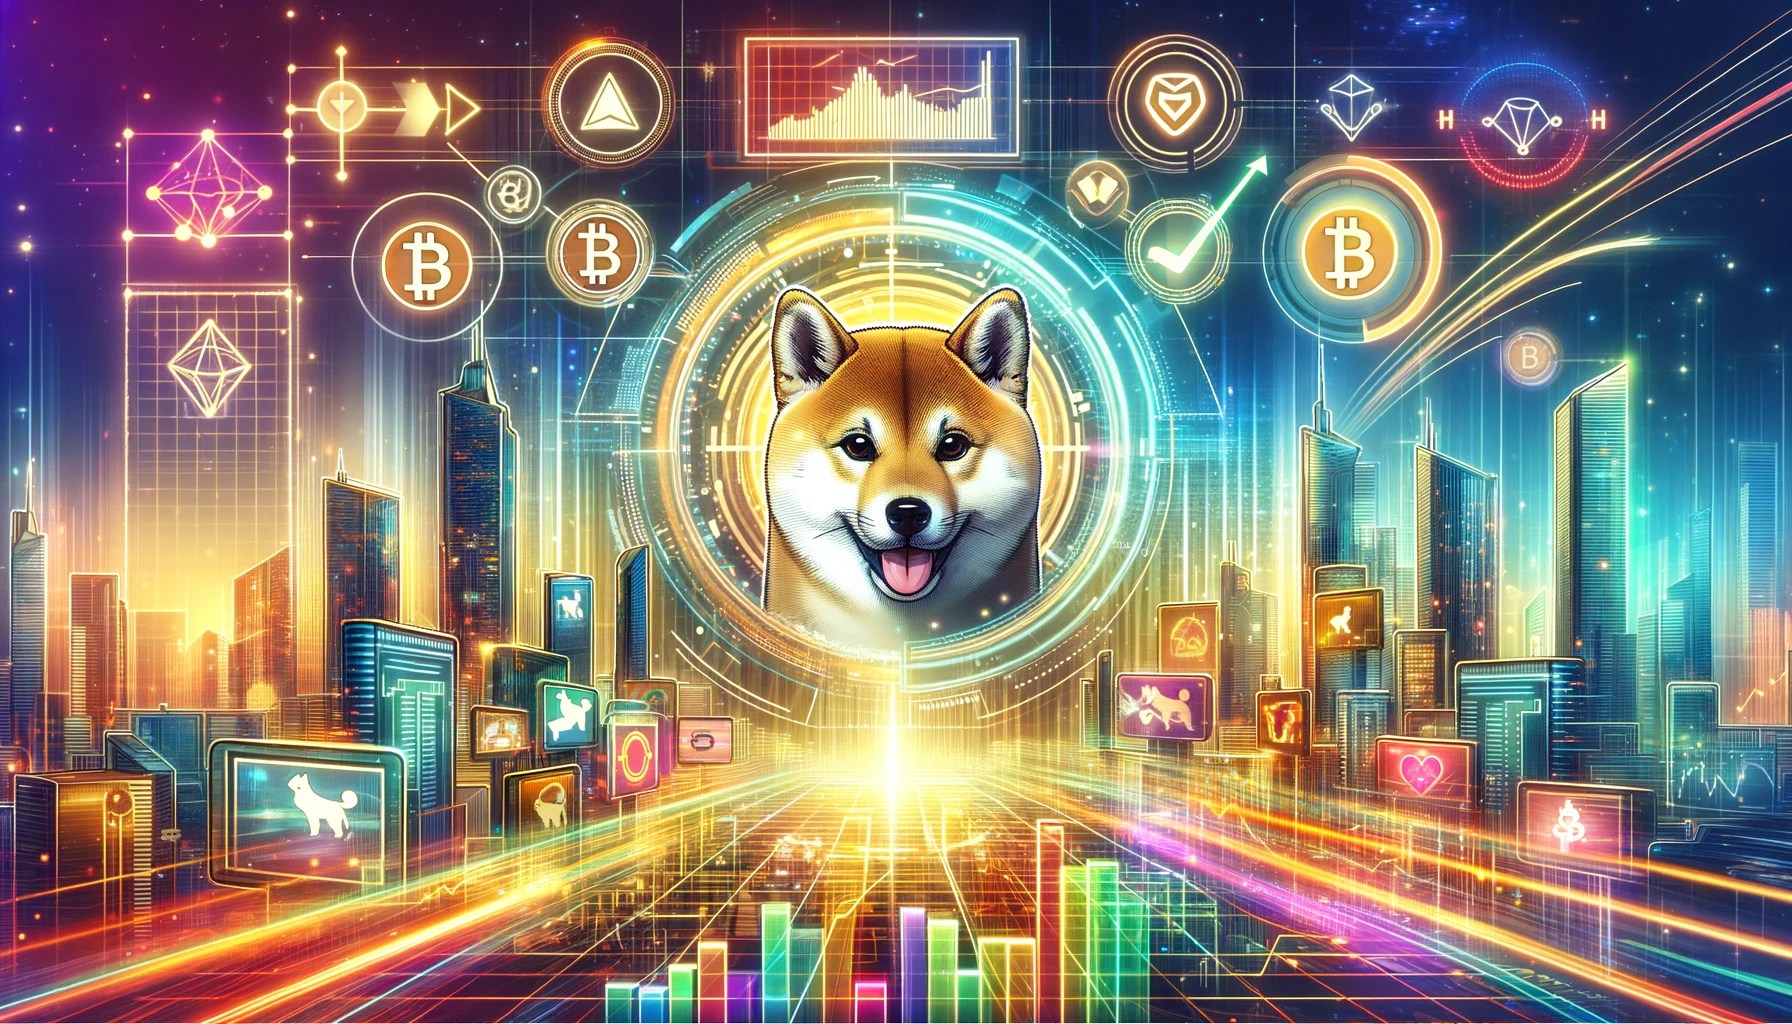 Here Are The Latest Shiba Inu Developments You Should Be Aware Of | Bitcoinist.com